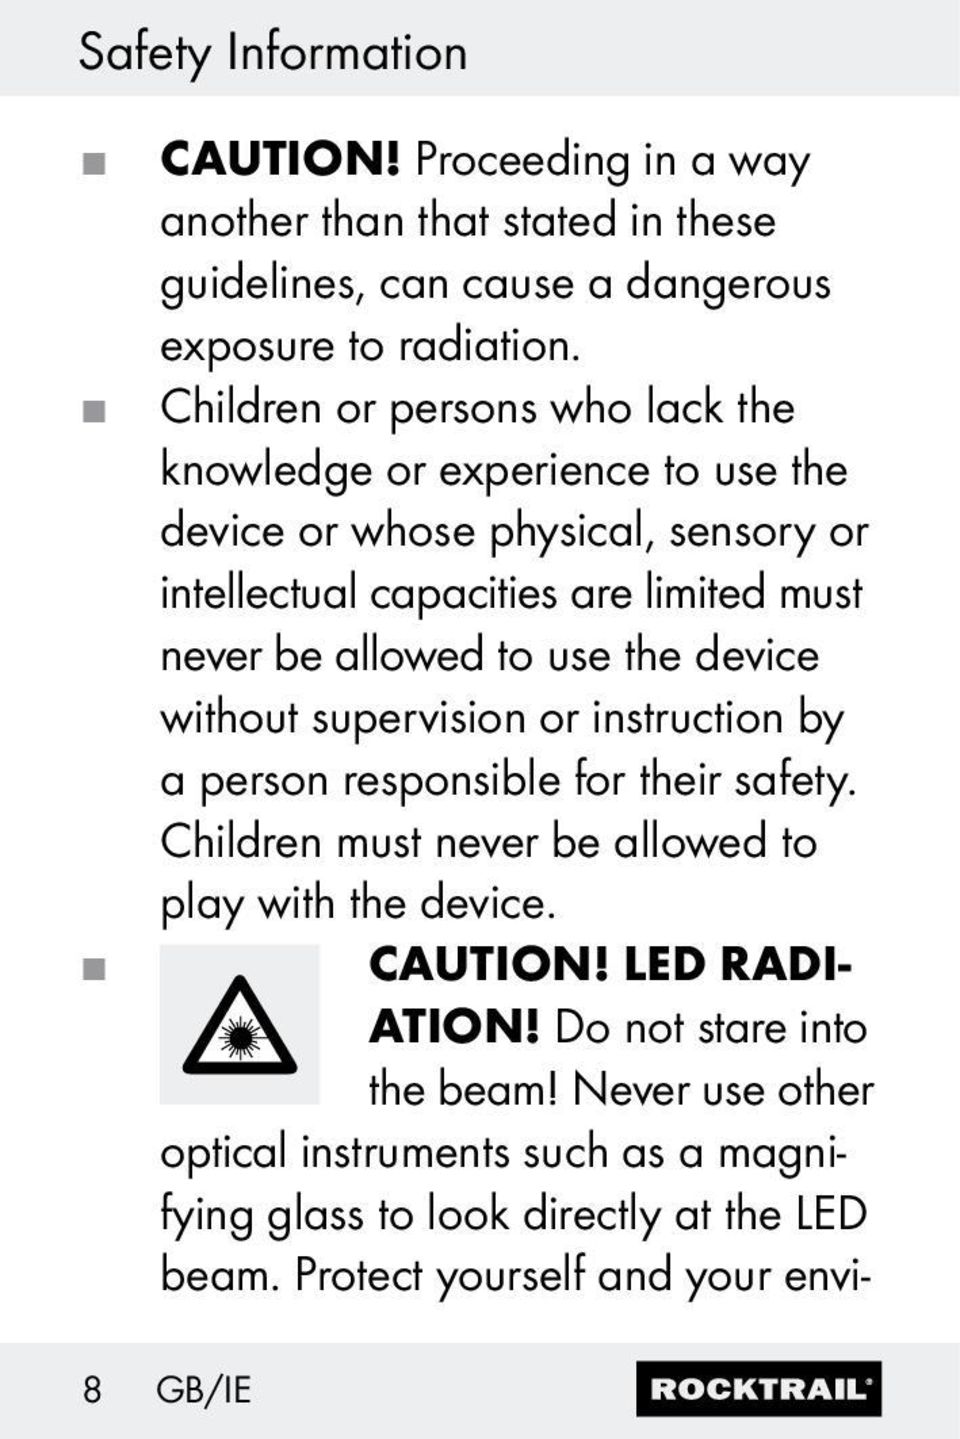 allowed to use the device without supervision or instruction by a person responsible for their safety. Children must never be allowed to play with the device.